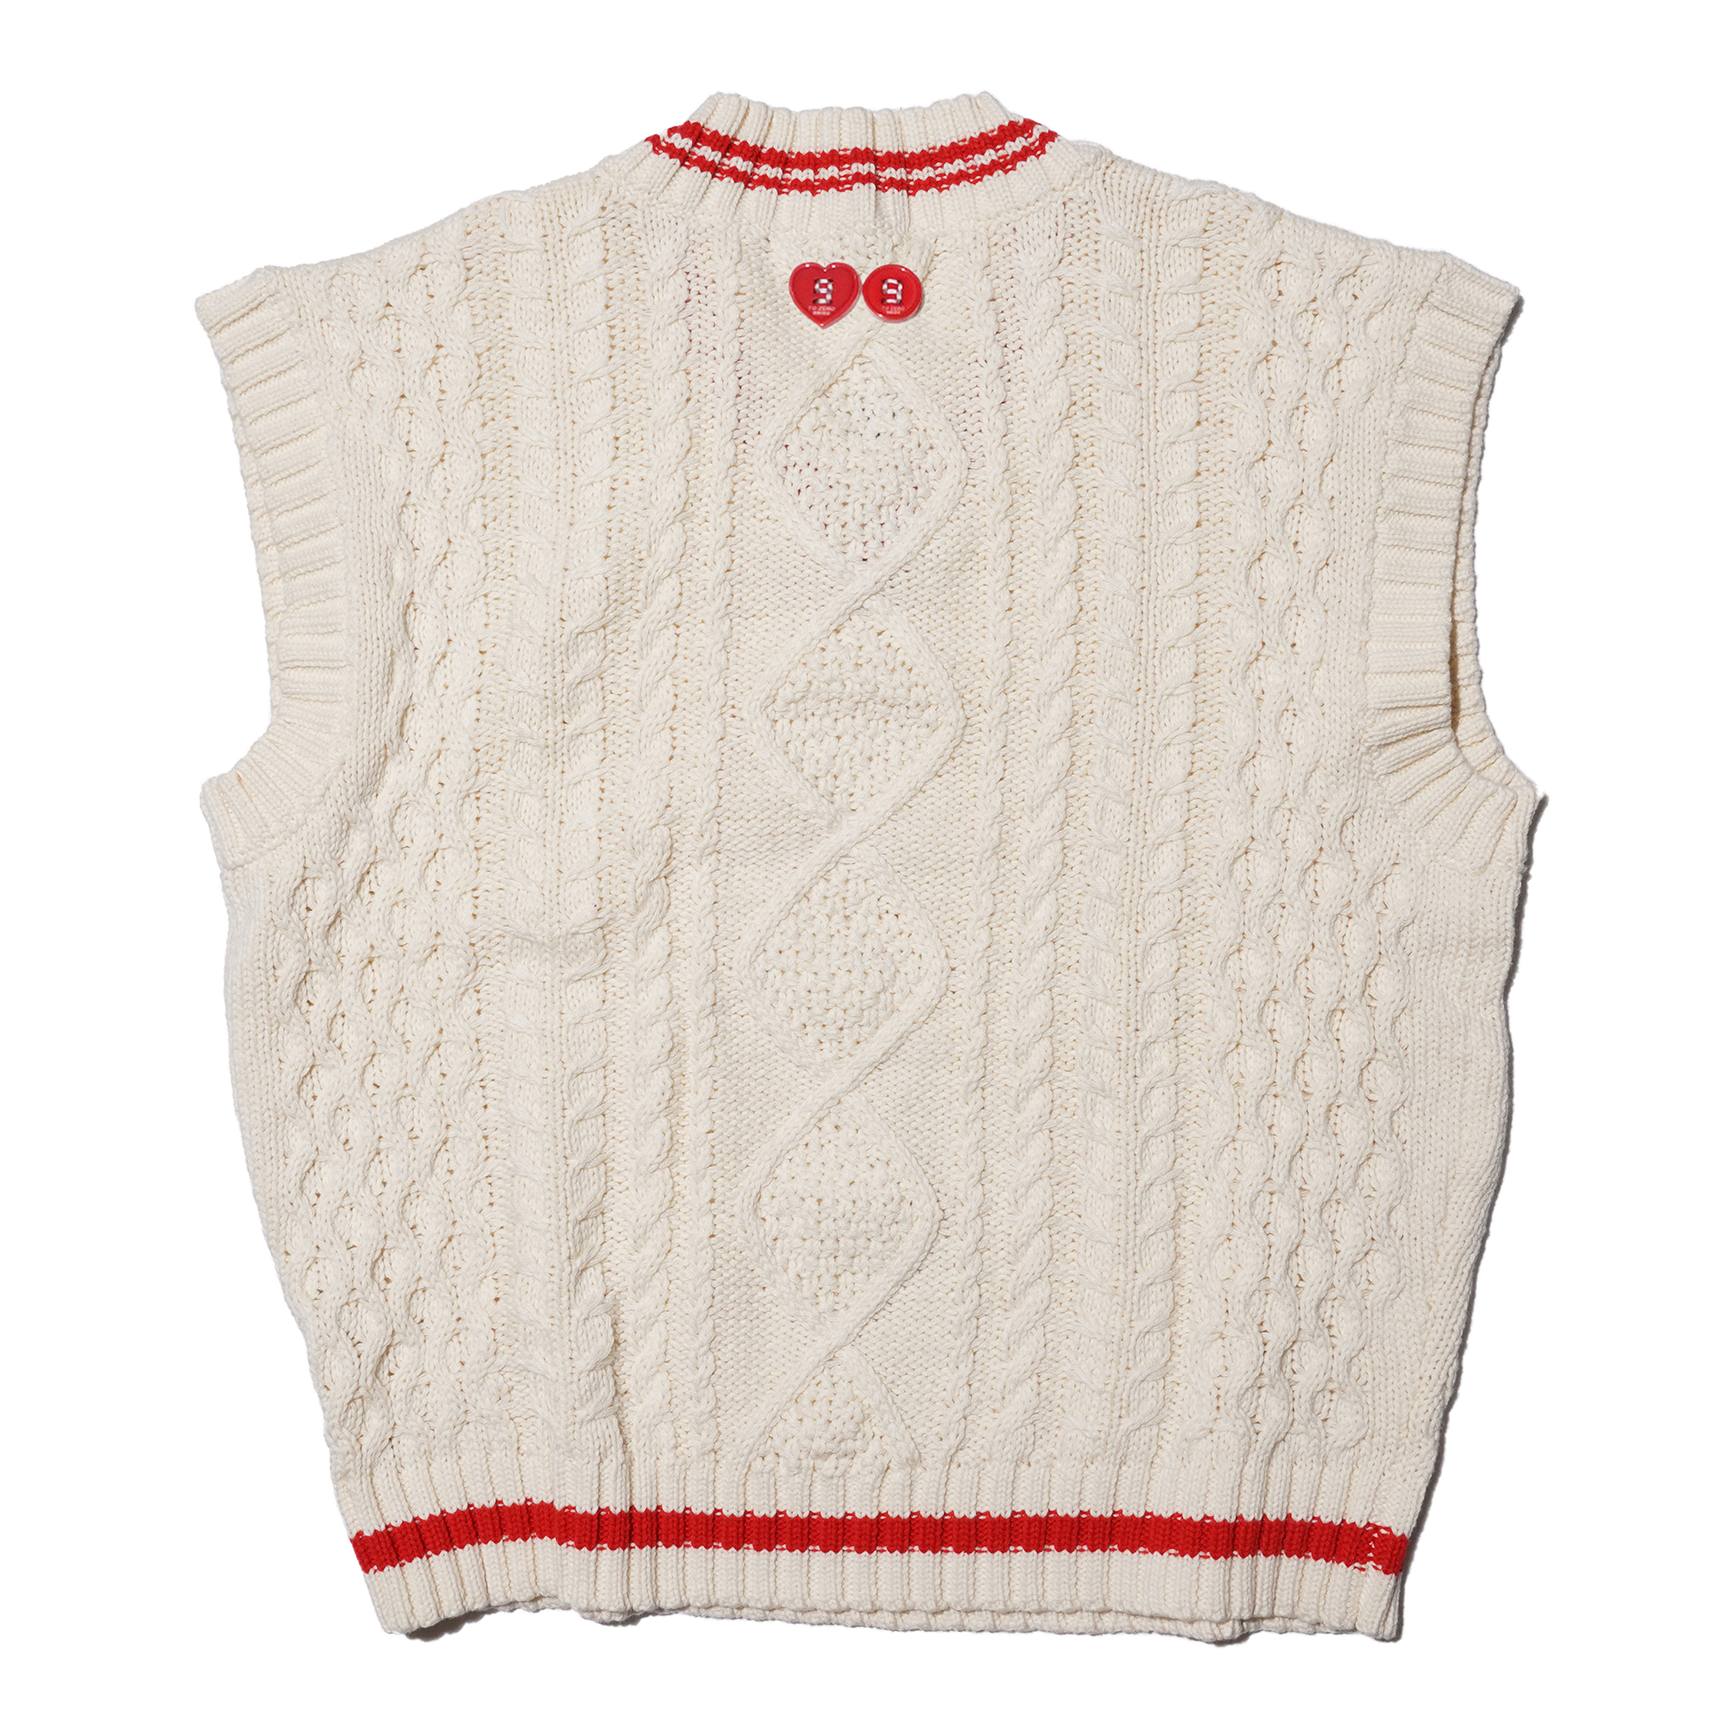 ‘TO ZERO 99/00’ Printed Cable Knit Vest